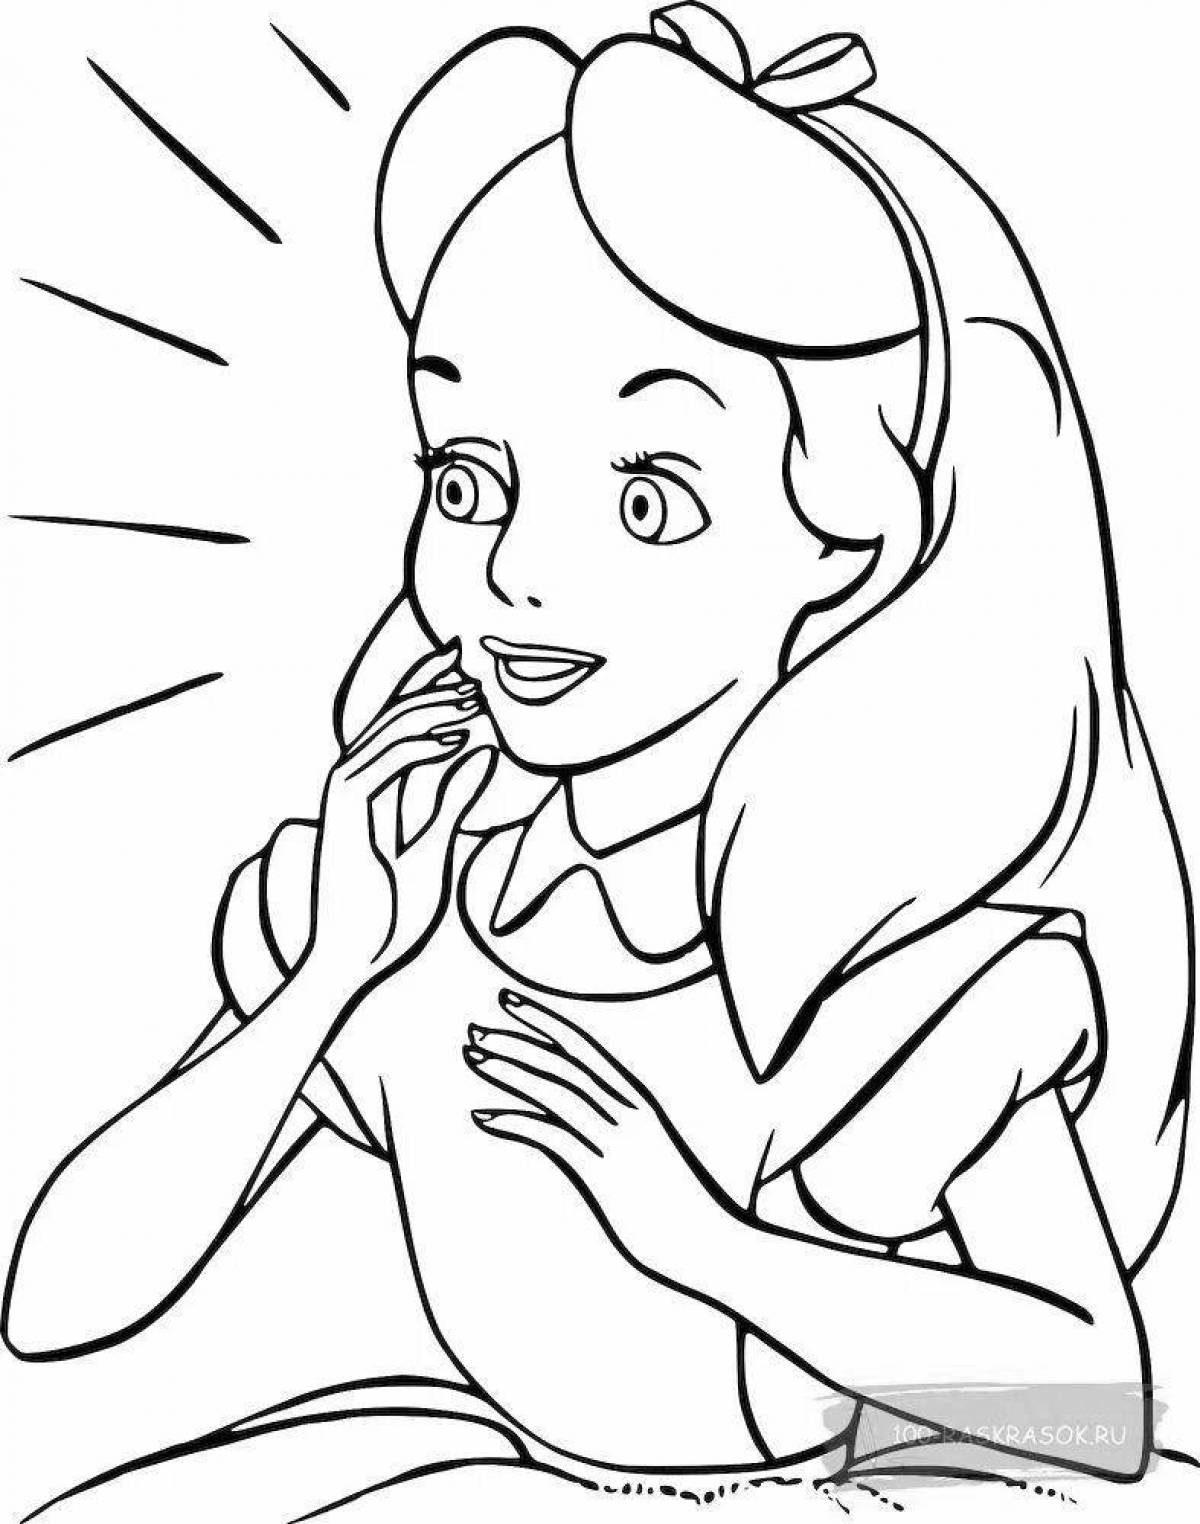 Let's awesome coloring pages